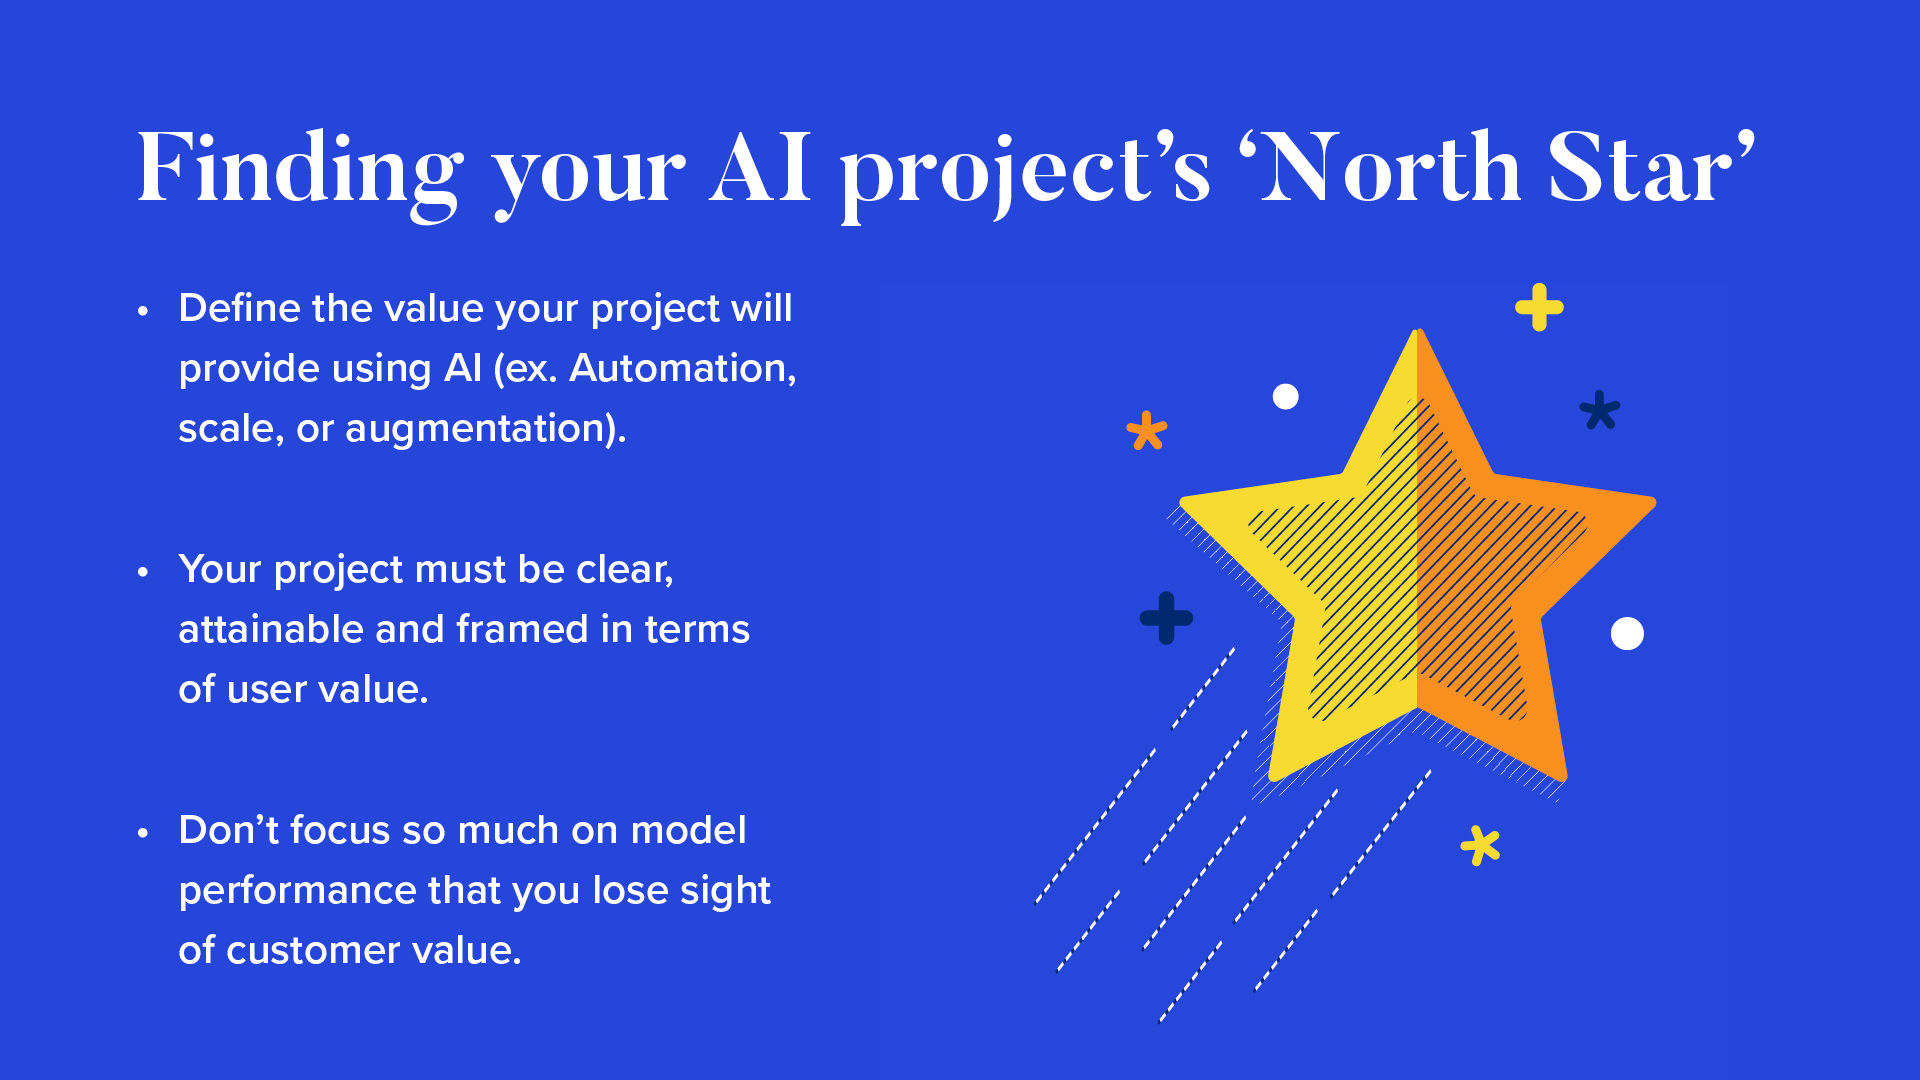 INFOGRAPHIC #1: Finding your AI project’s ‘North Star’

Define the value your project will provide using AI (ex. Automation, scale, or augmentation). 
Your project must be clear, attainable and framed in terms of user value.
Don’t focus so much on model performance that you lose sight of customer value.
